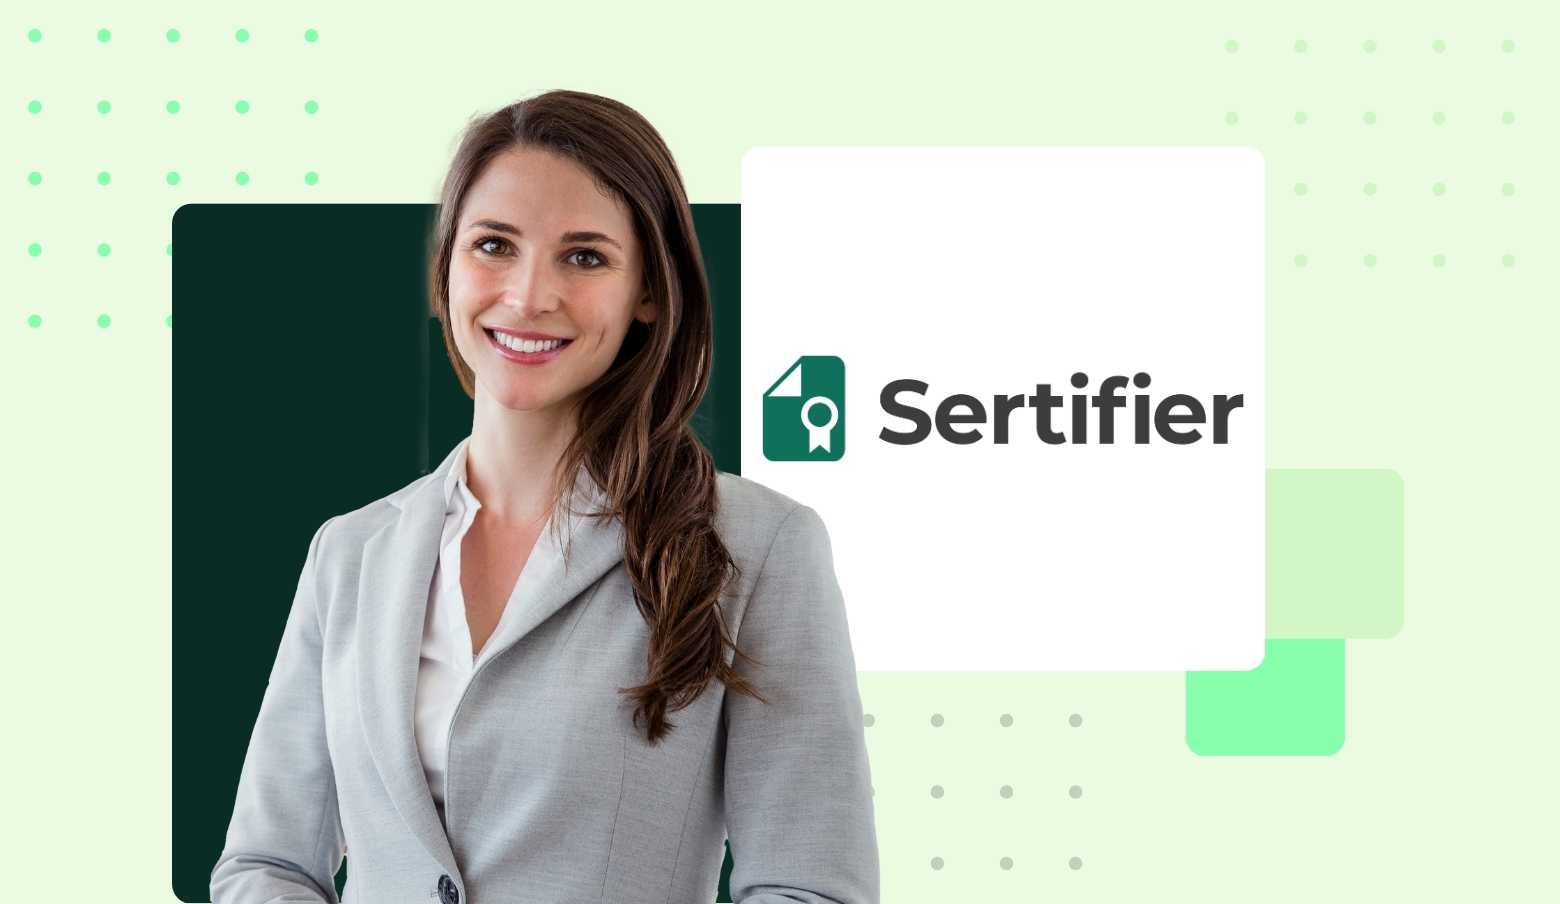 Digital Credentials 101: How to Use Sertifier for Credential Management